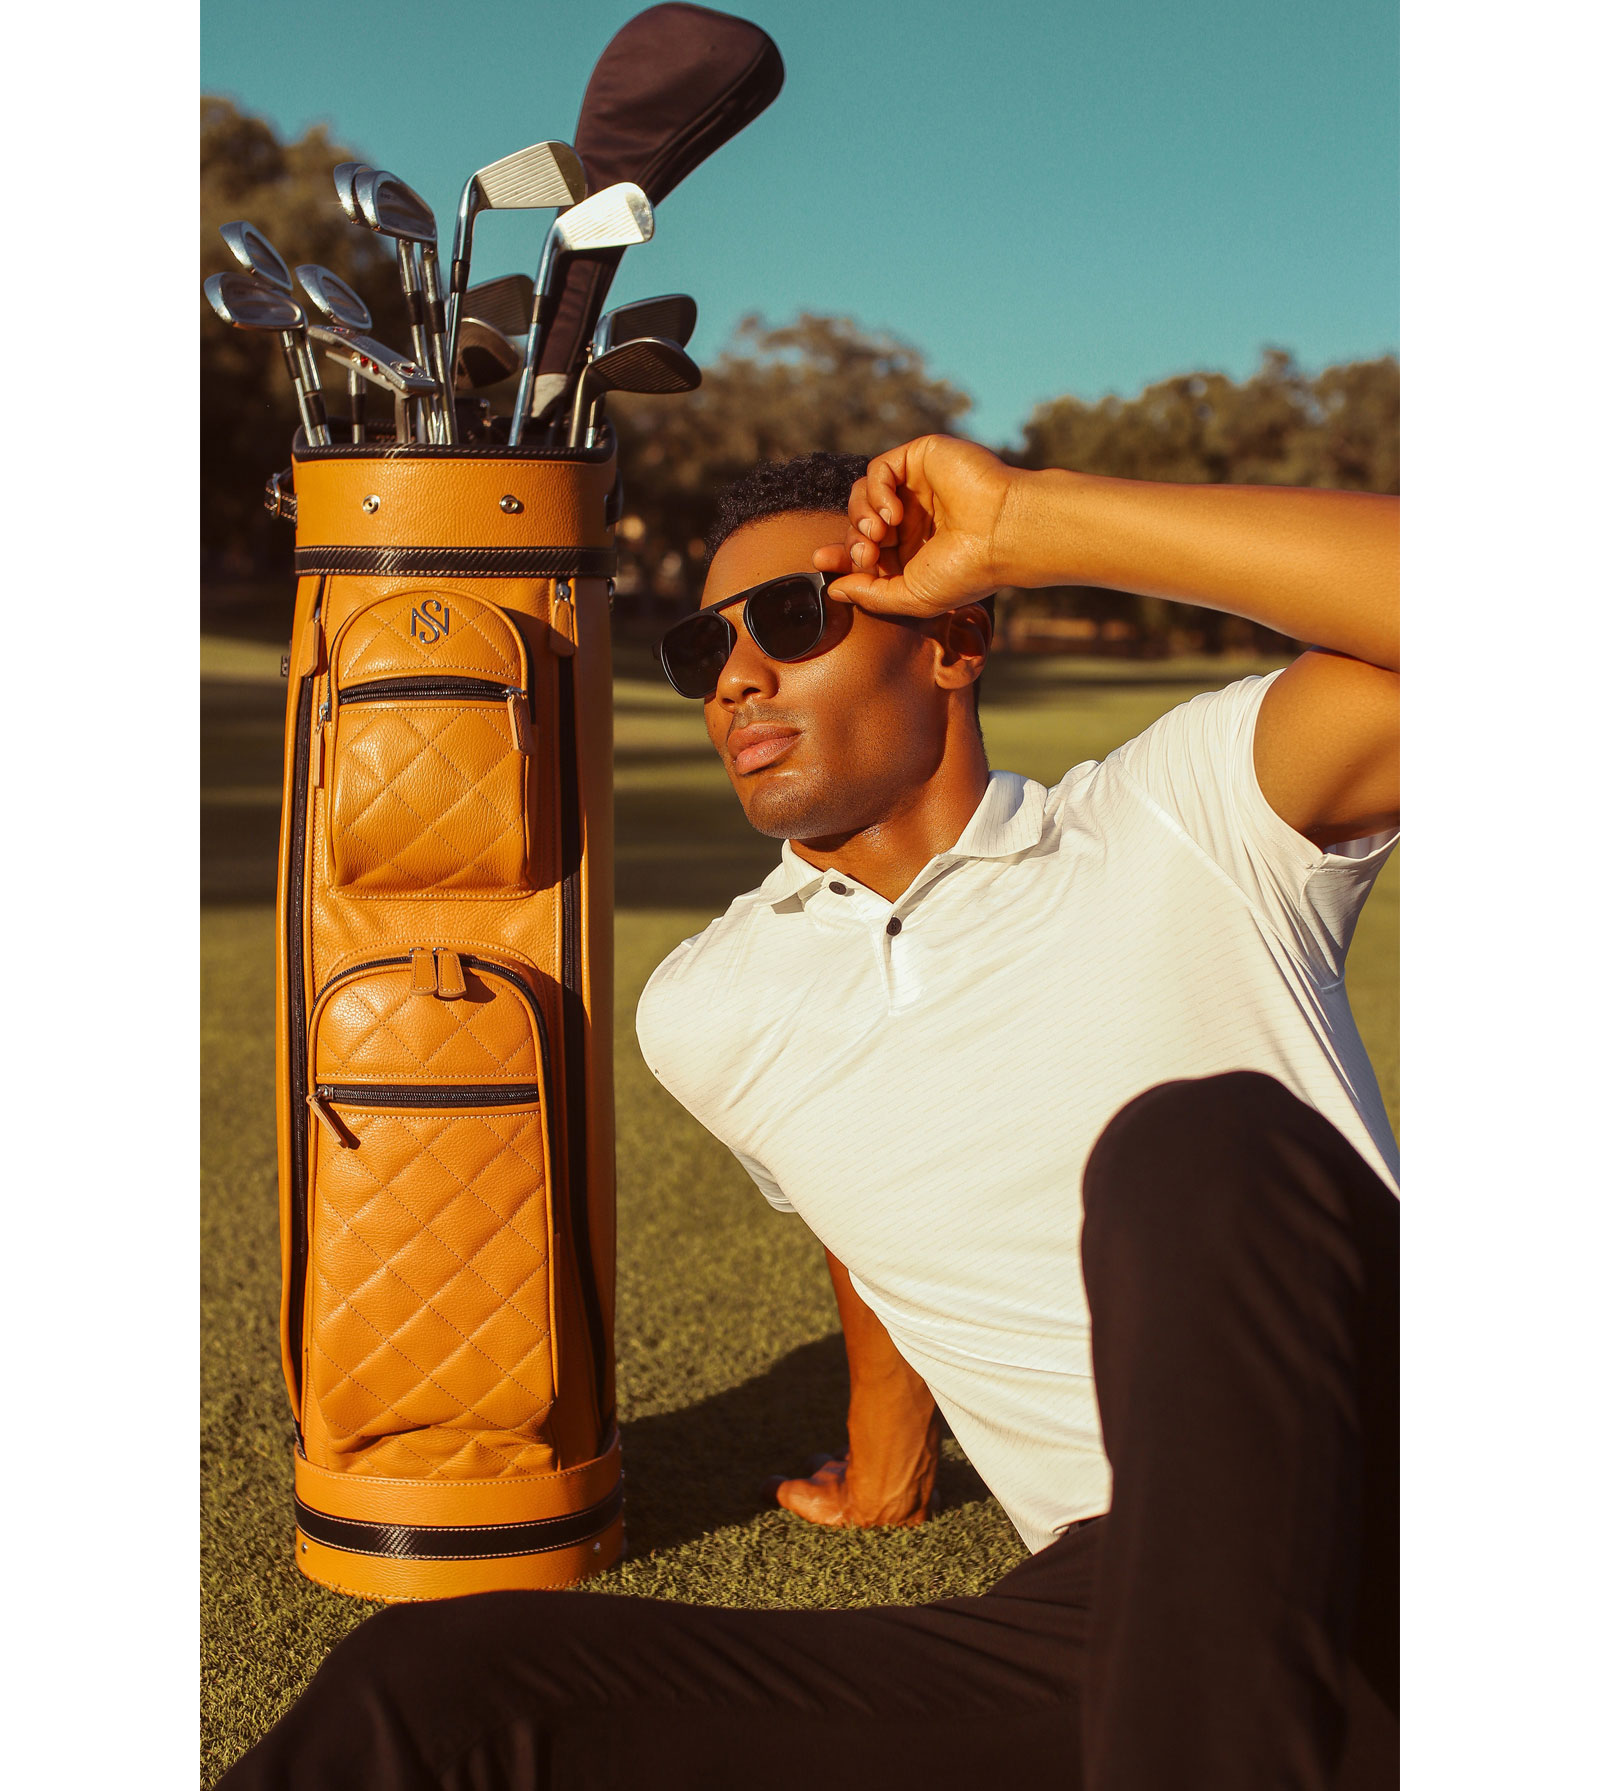 Soul of Nomad luxury golf bag collection